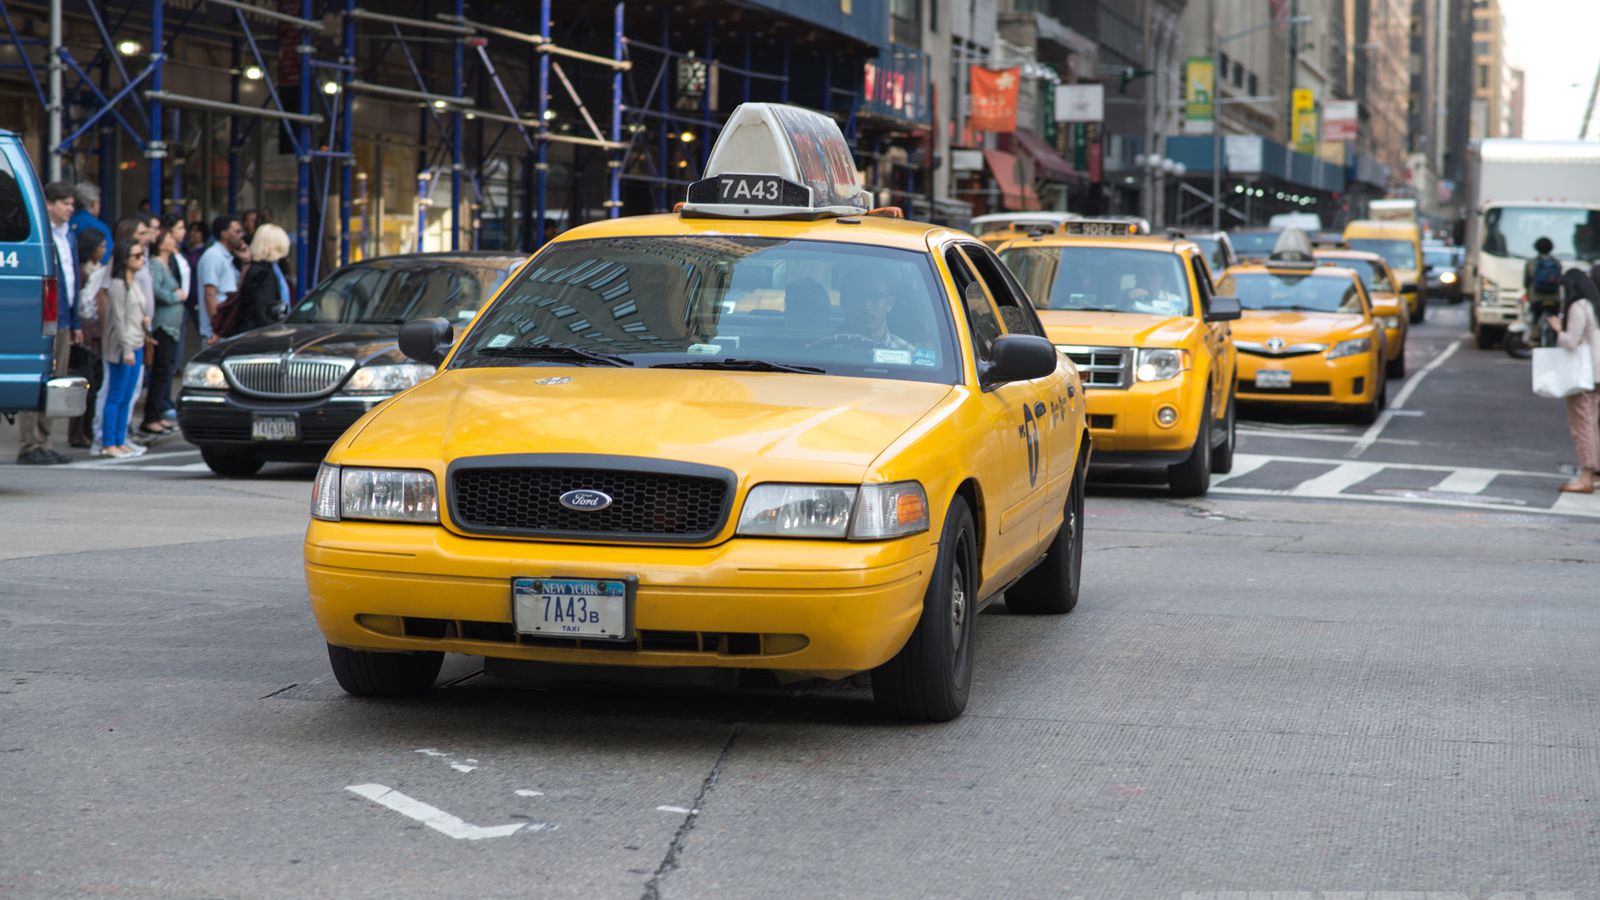 One data set doxxed every cab driver in New York.